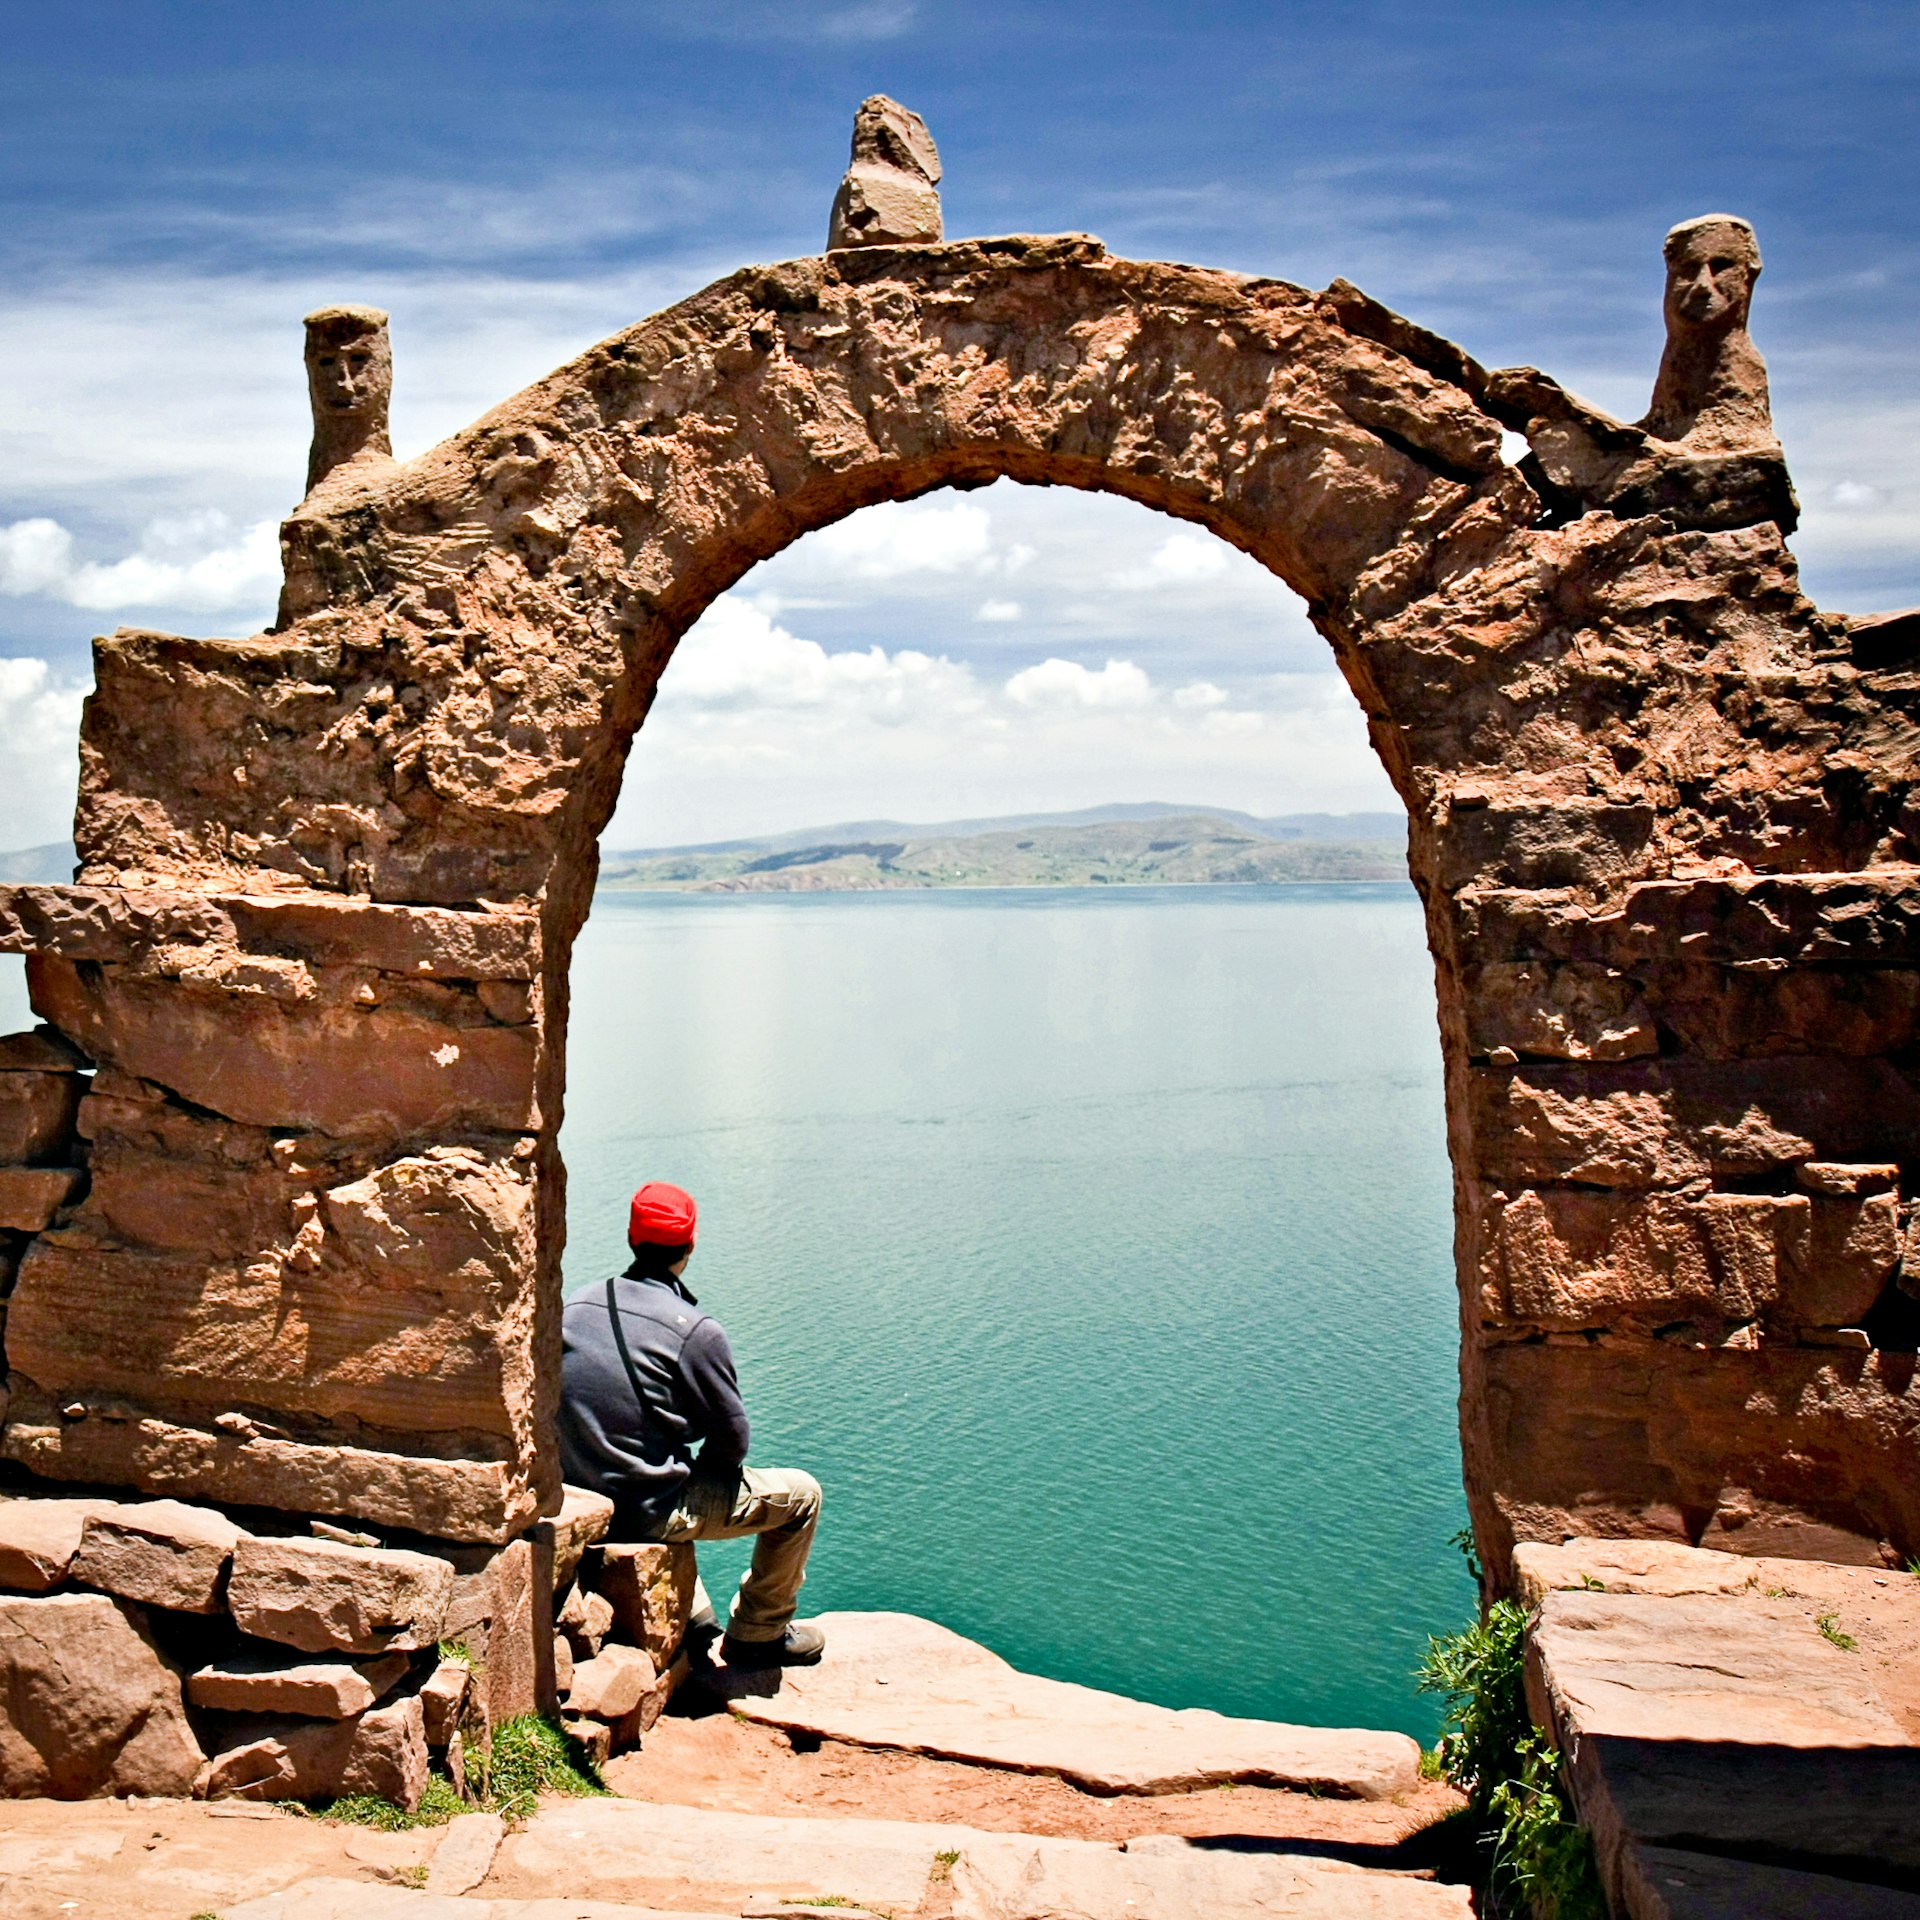 Man wearing a red hat, sits under a stone archway on Taquile Island, Lake Titicaca, Peru 